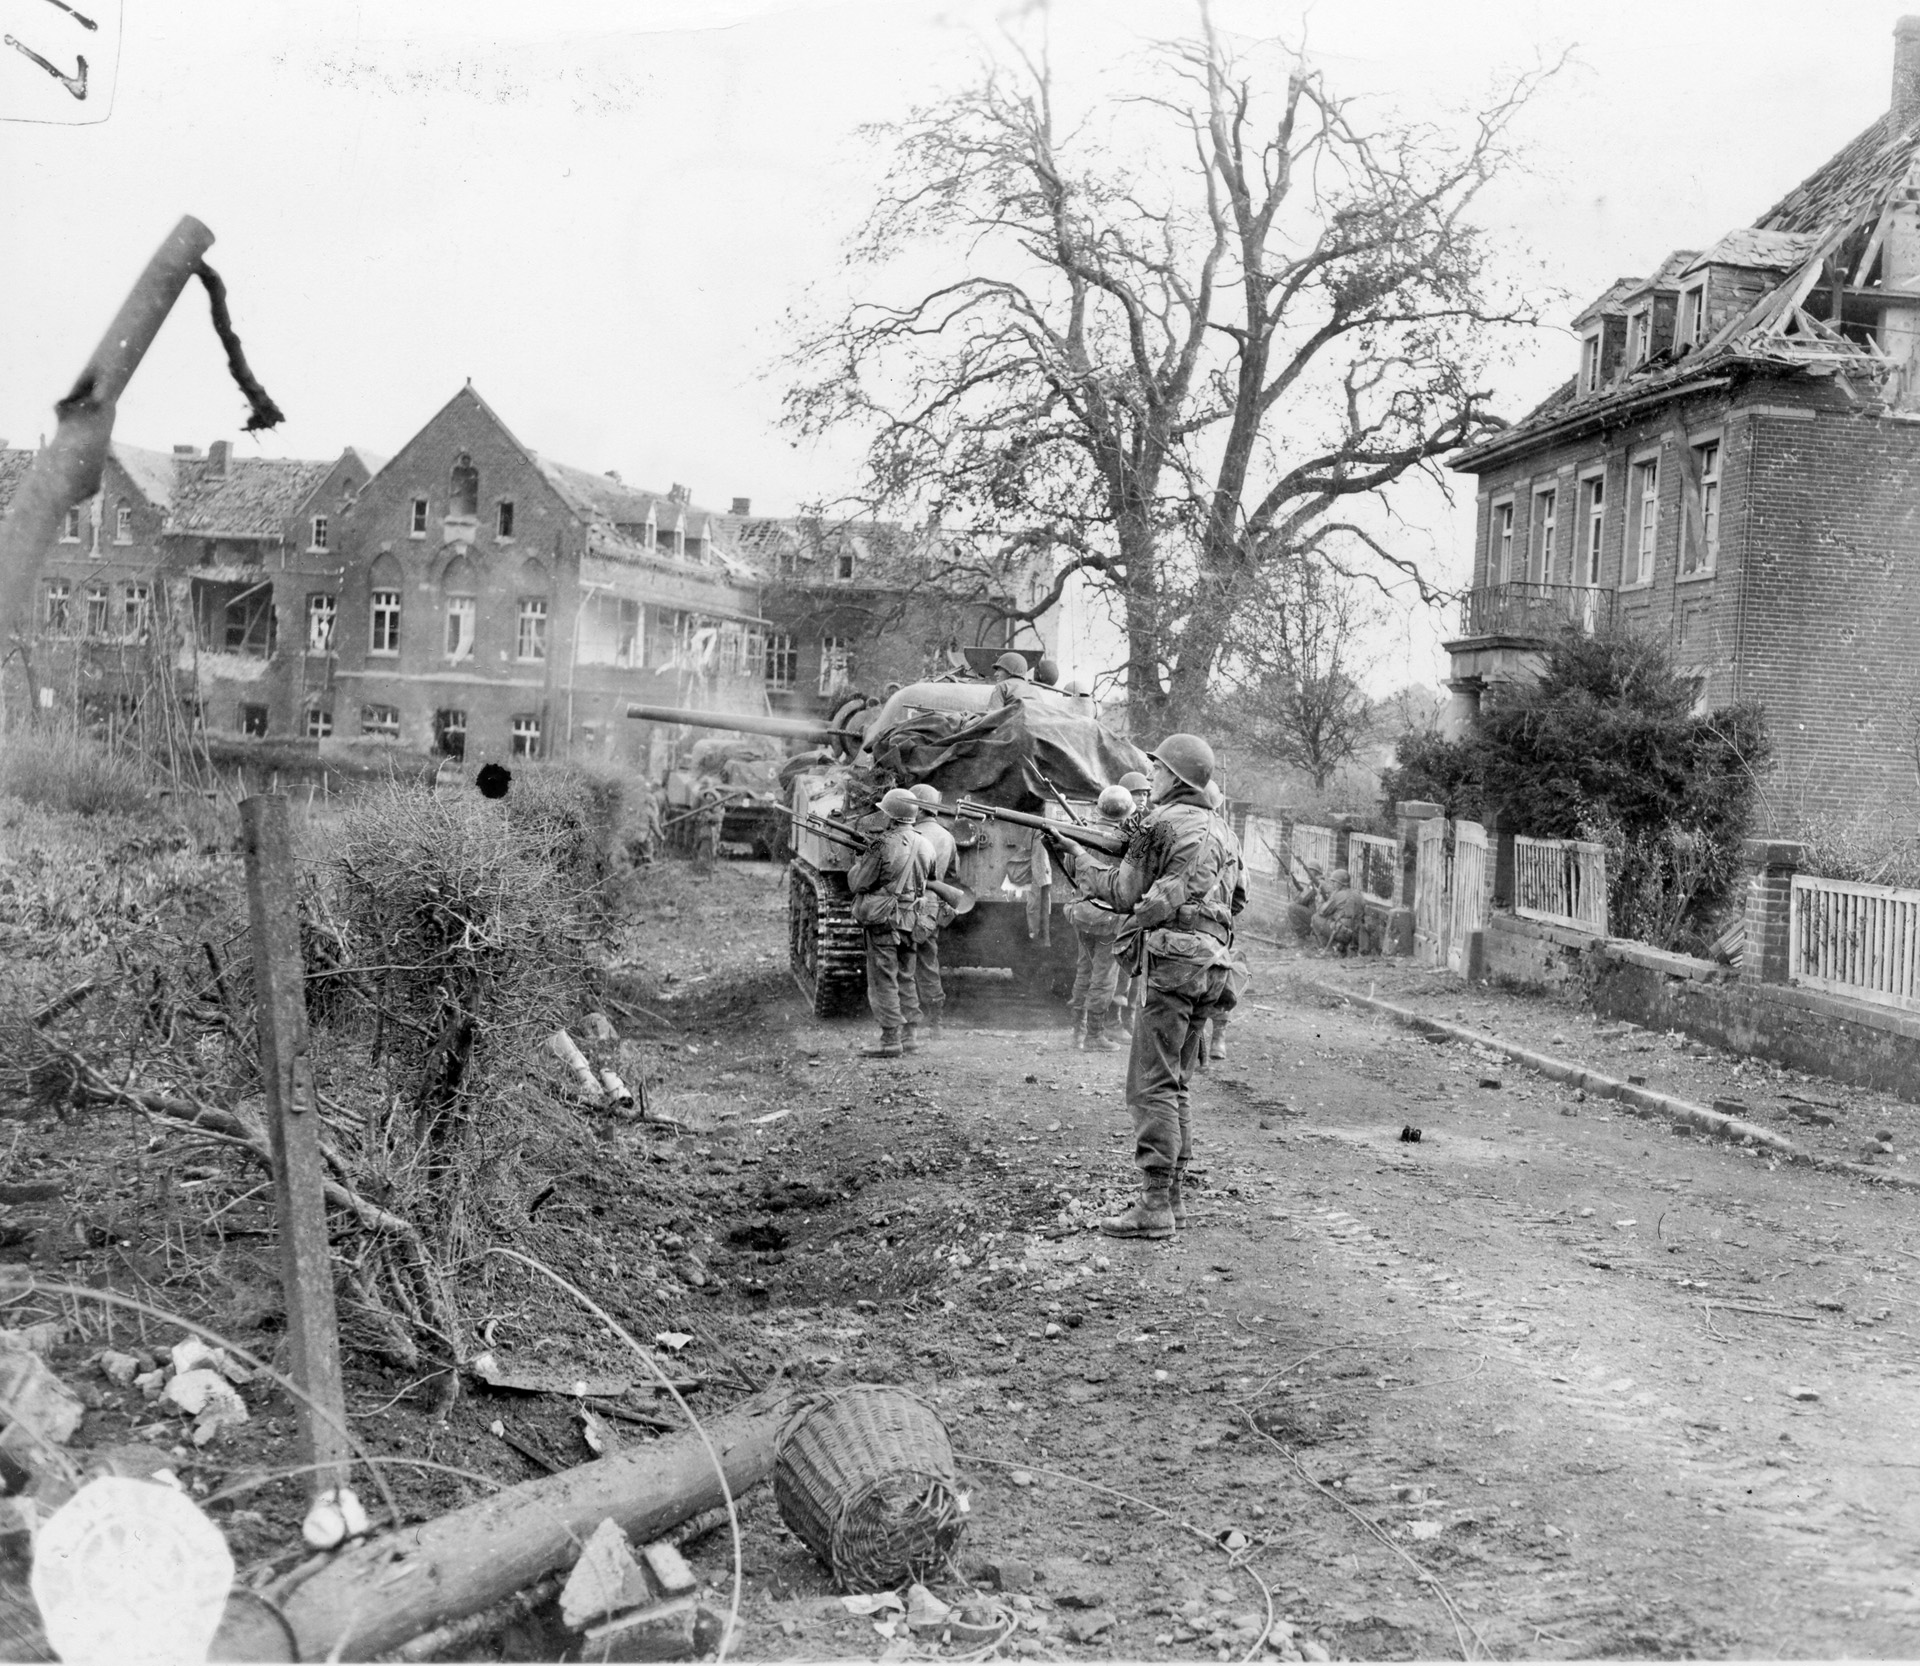 Soldiers of the 333rd Regiment, 84th Infantry Division (“Railsplitters”), advance behind an M4A3 Sherman tank as it uses its hull-mounted machine gun to blast an enemy position in a residential section of Geilenkirchen, Germany.